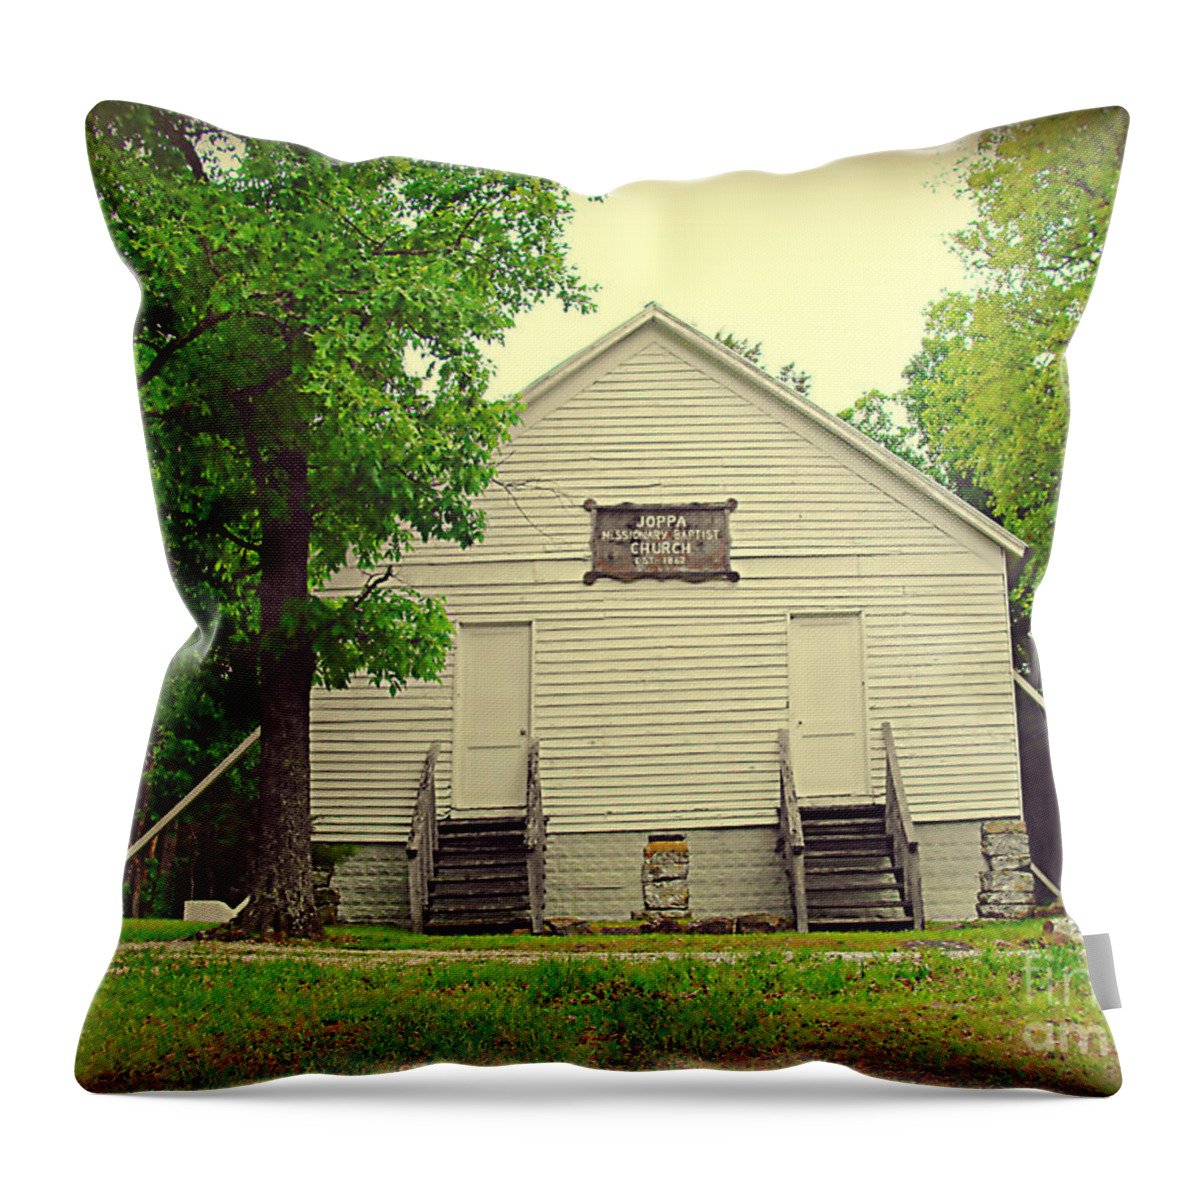 Historic Throw Pillow featuring the photograph Joppa Missionary Baptist Church 1862 by Stacie Siemsen